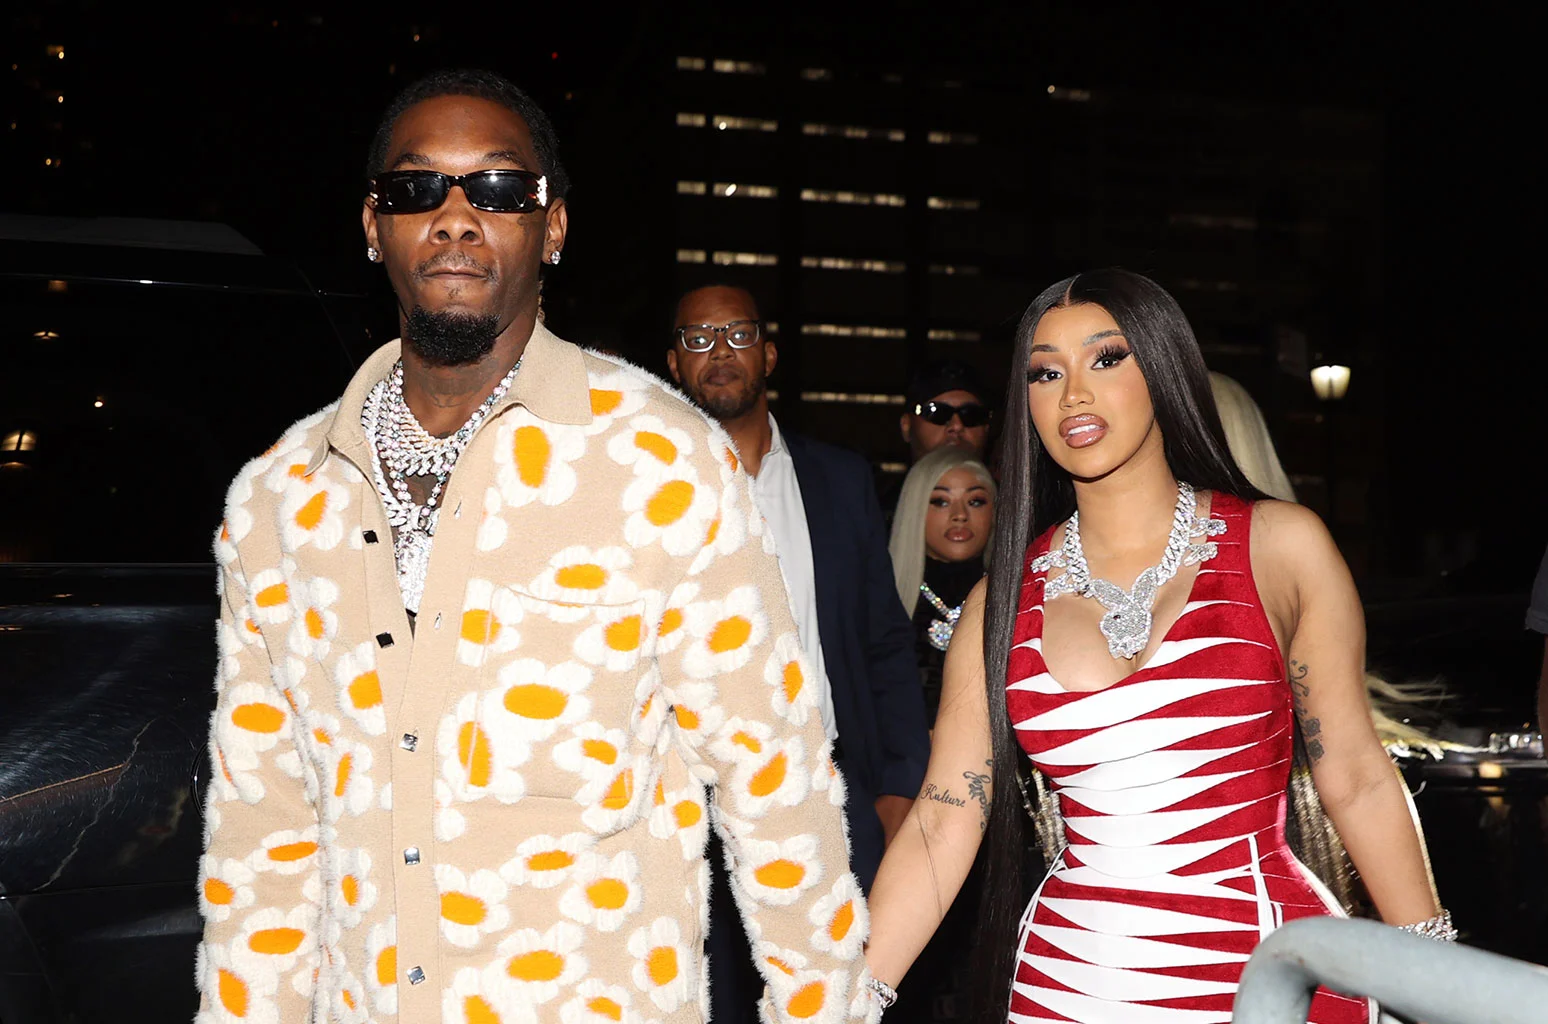 Cardi B threatens lawsuit against person behind Offset cheating claims